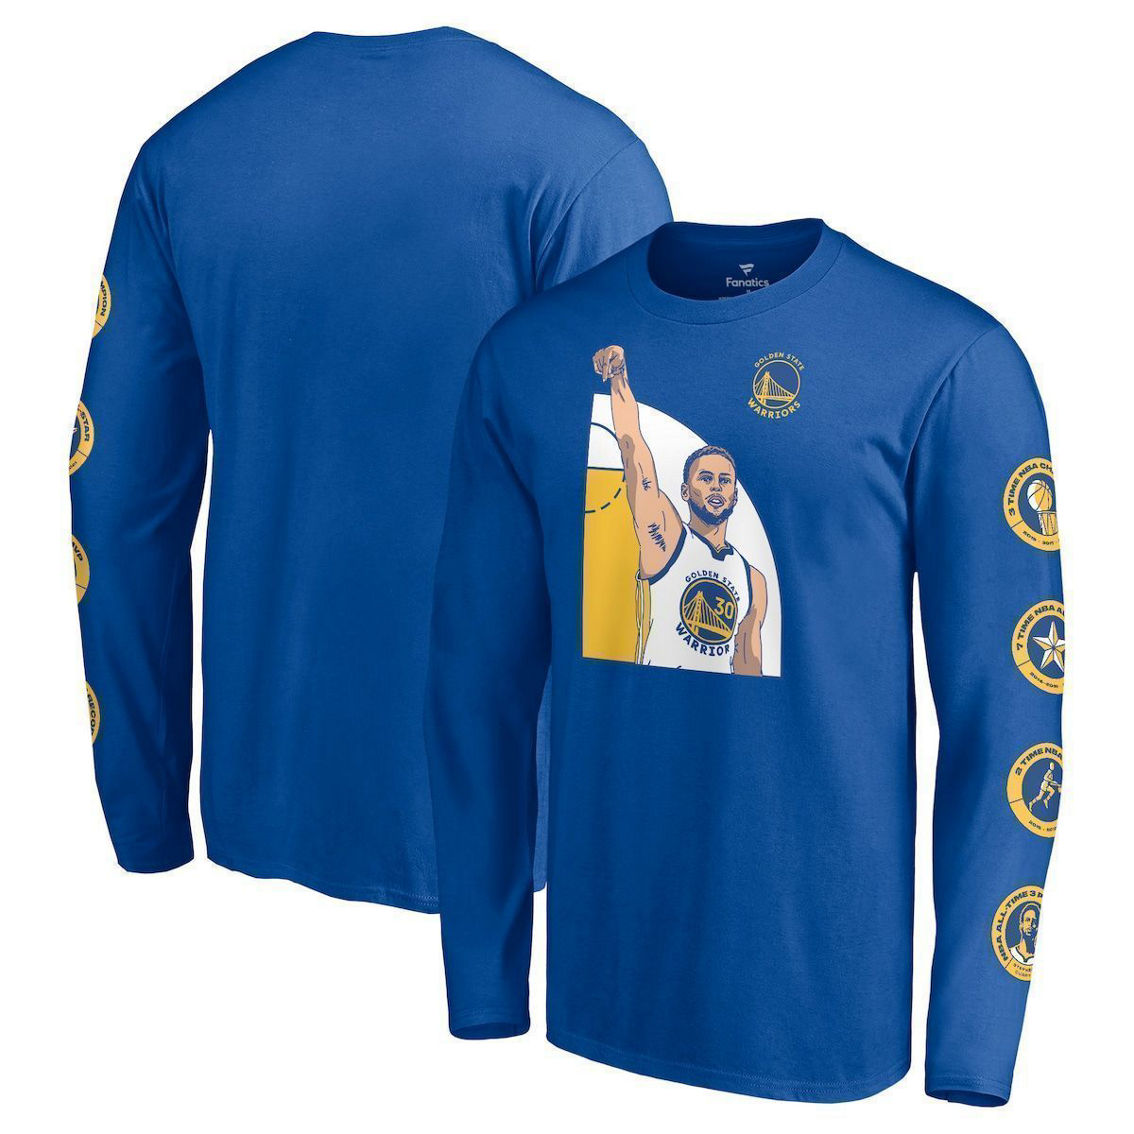 Men's Fanatics Branded Stephen Curry Royal Golden State Warriors NBA All-Time Three Point Record Long Sleeve T-Shirt - Image 2 of 4